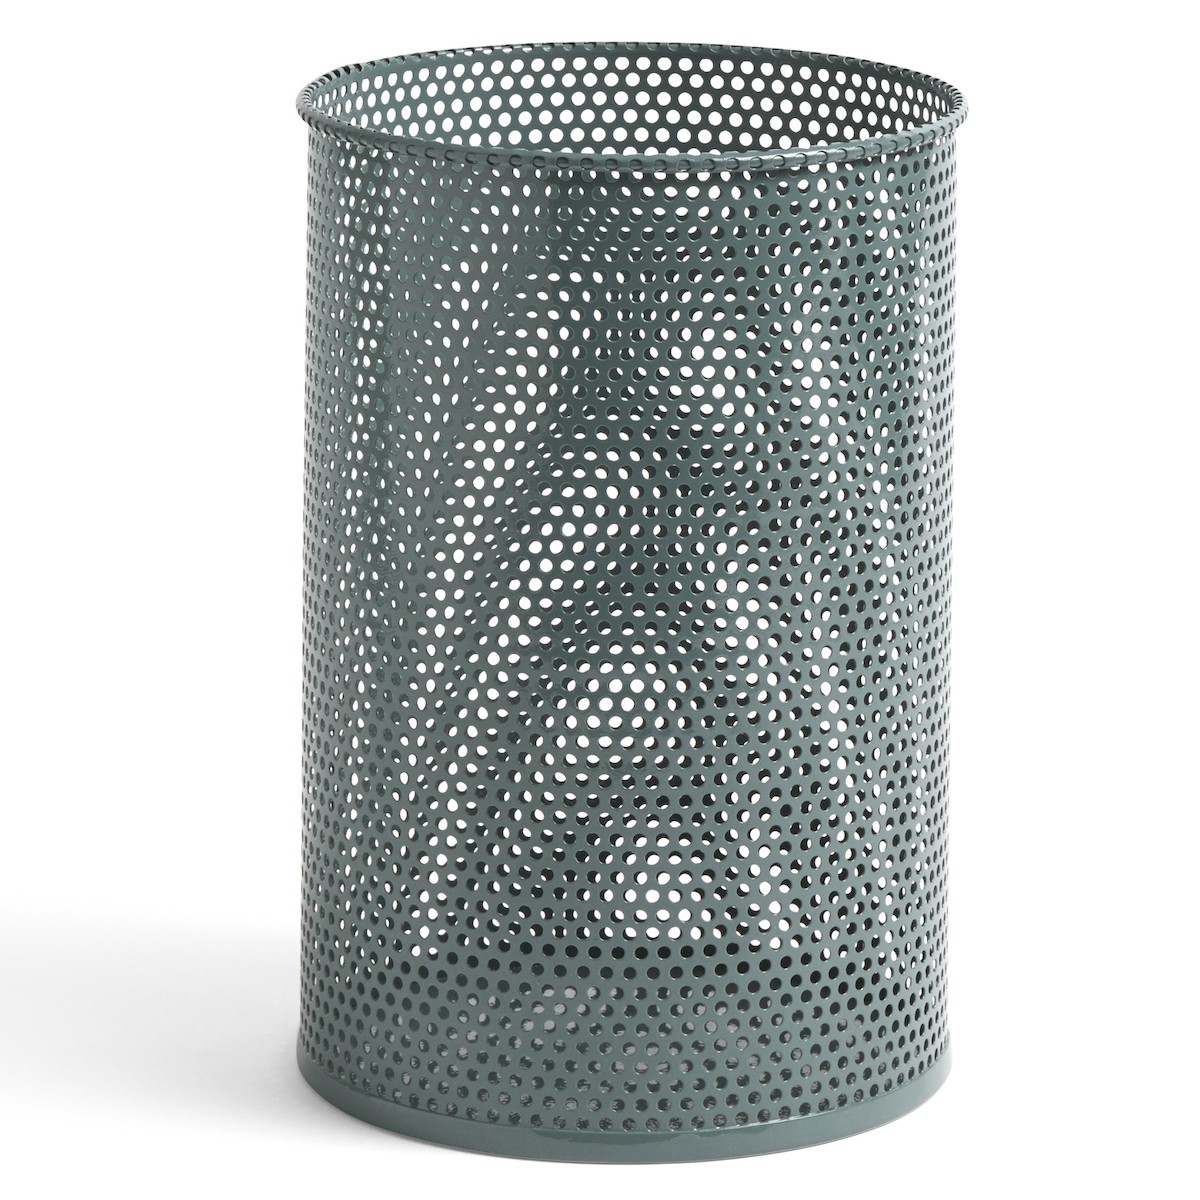 SOLD OUT - H37 x Ø25 cm - Sage Green - Perforated Bin M